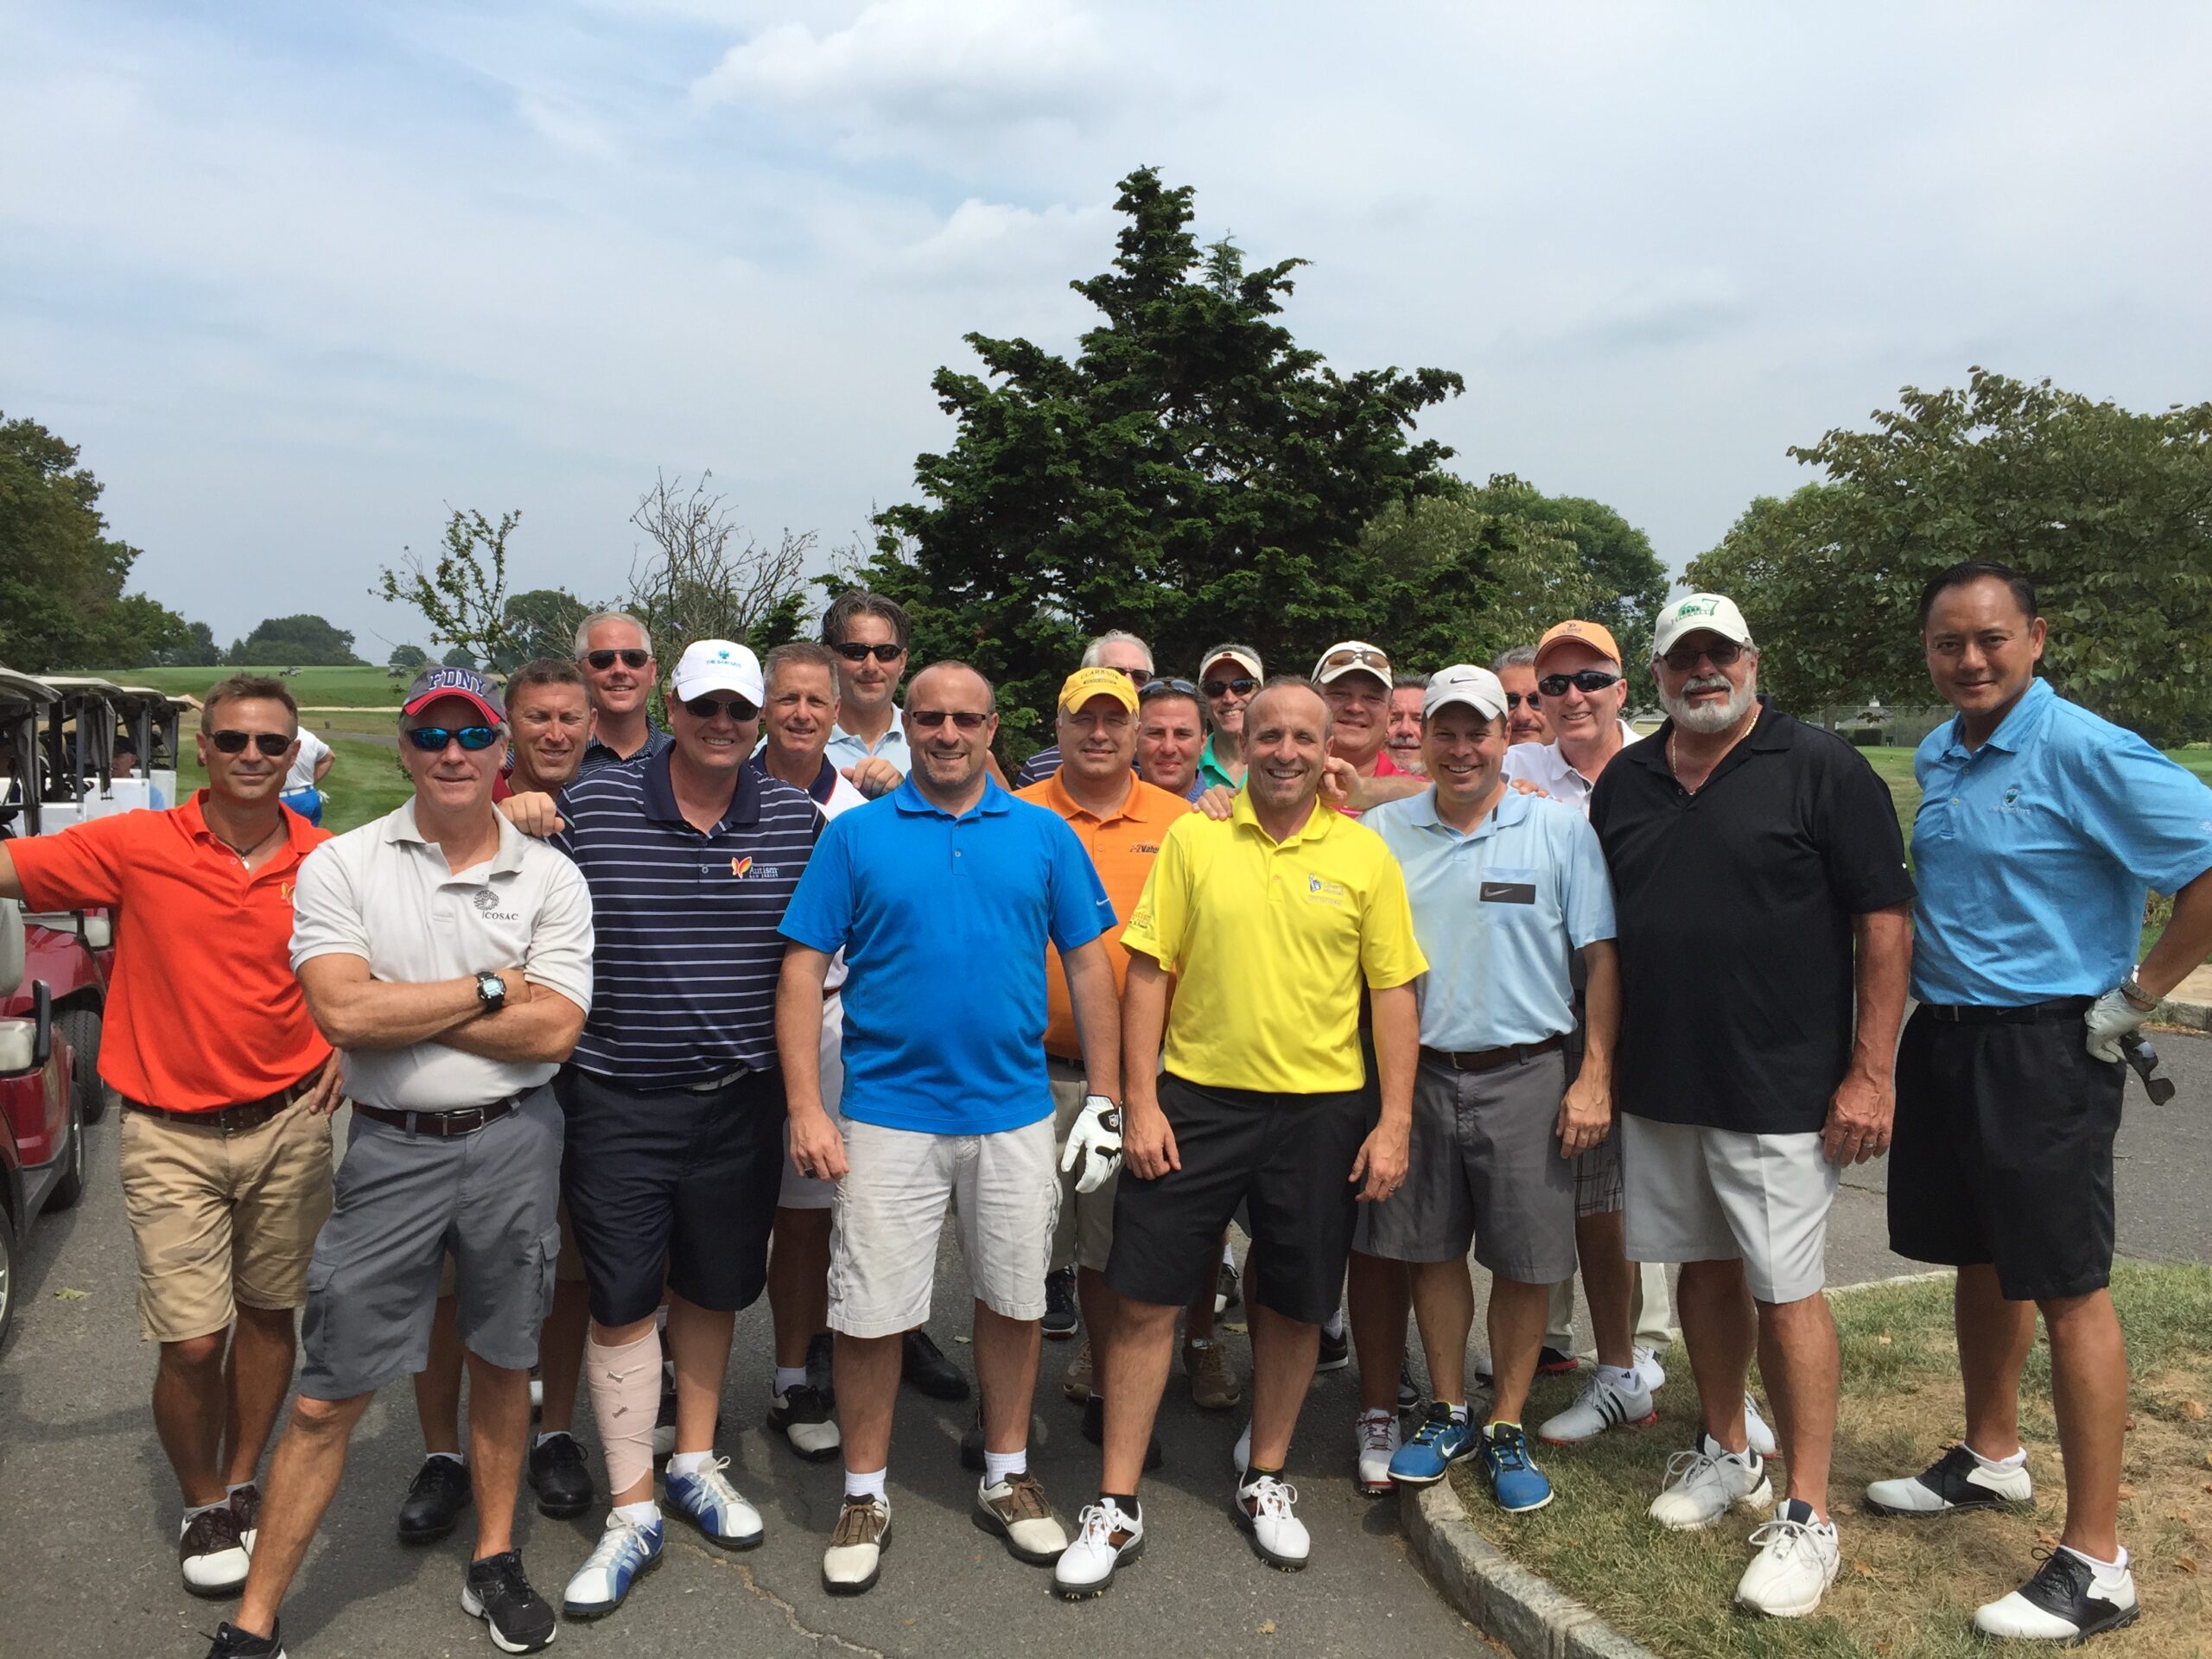 25th Annual Golf Outing for Autism NJ